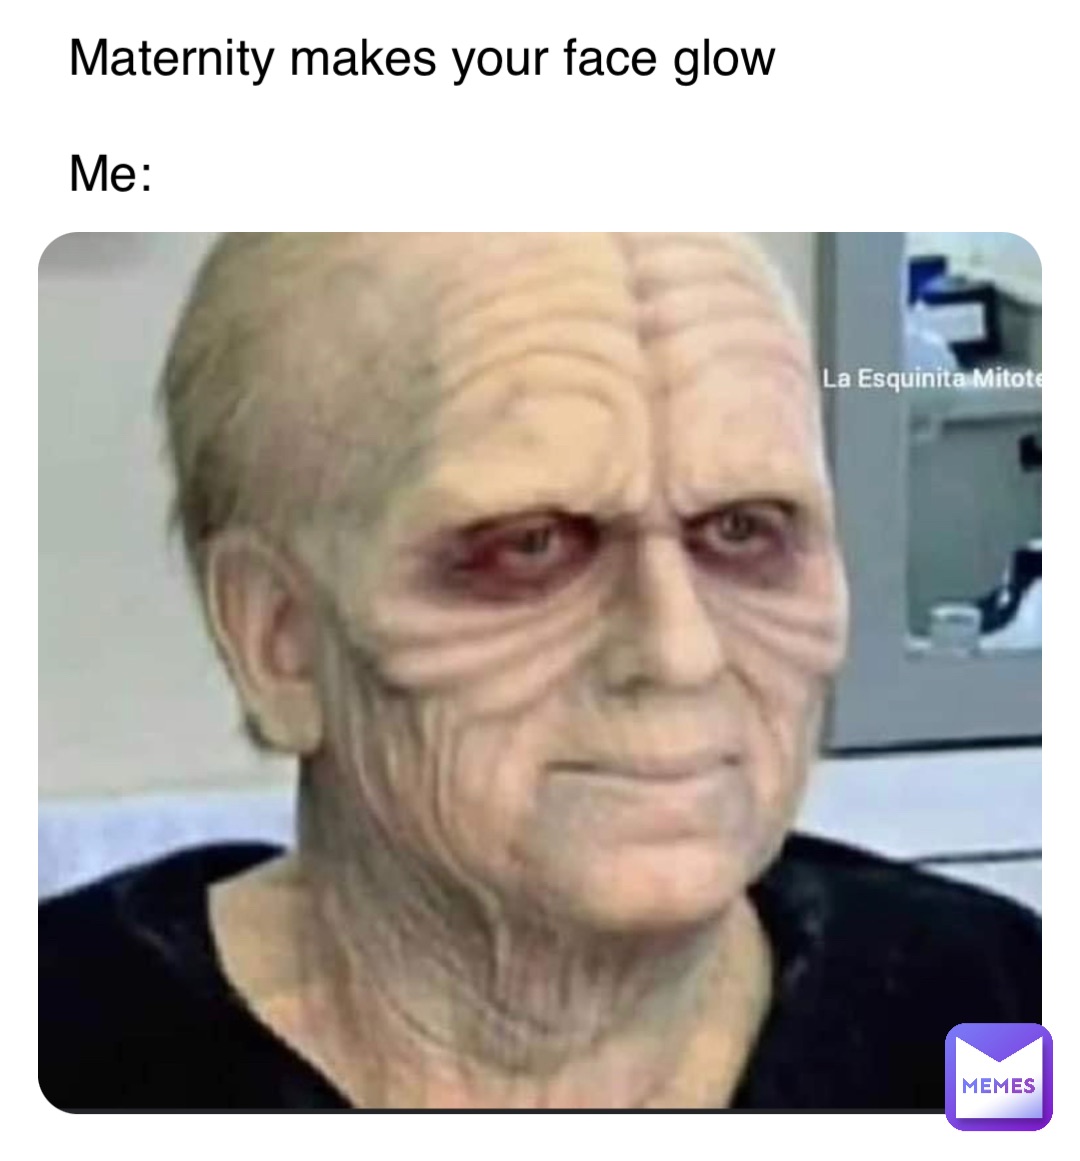 Maternity makes your face glow

Me: